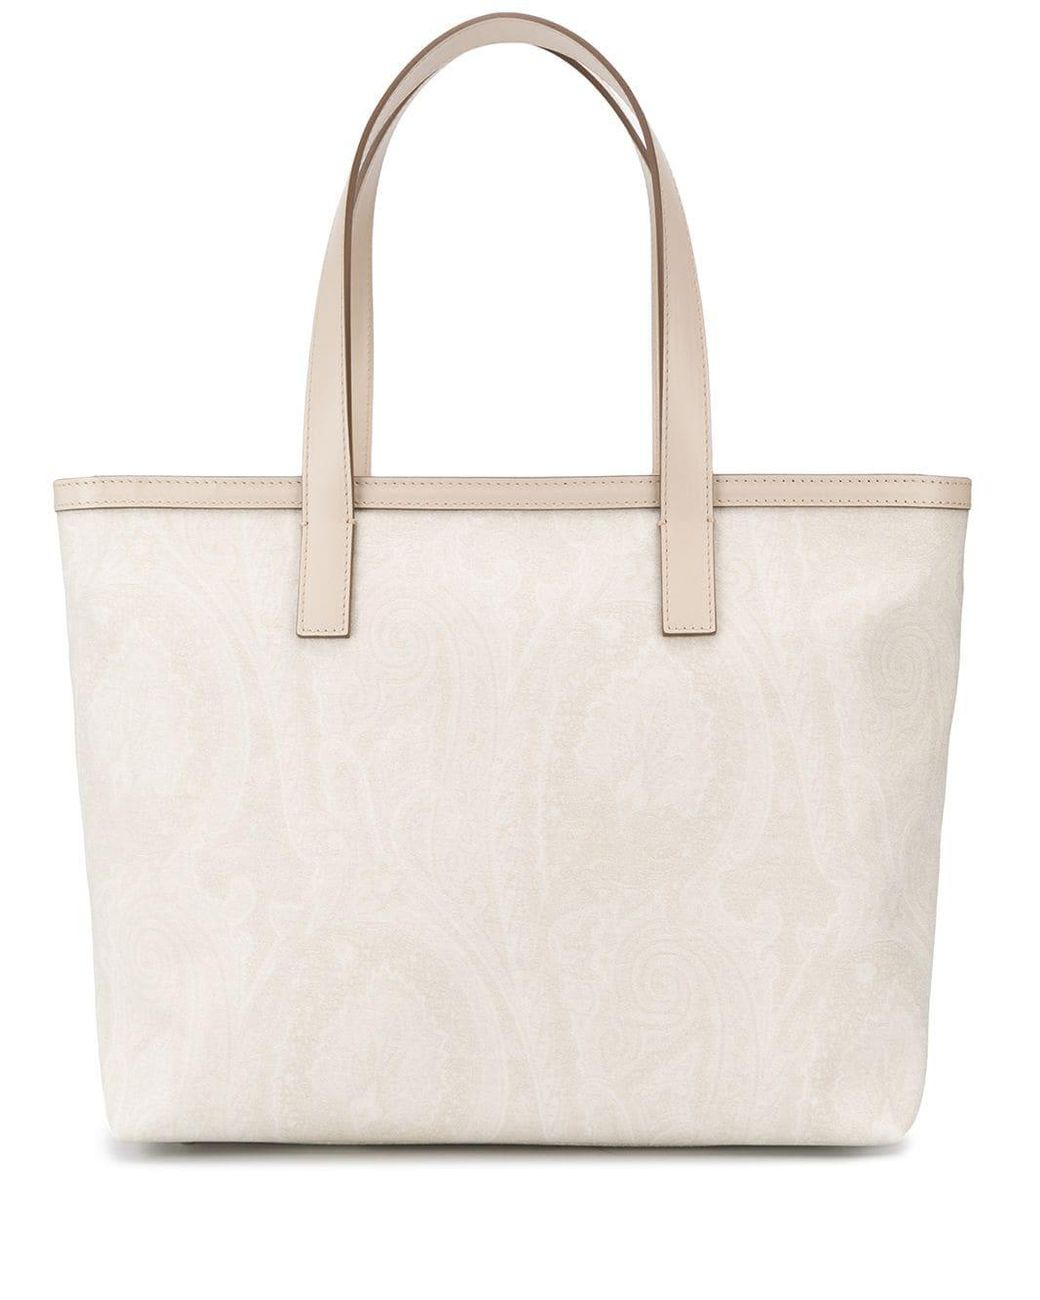 Etro Leather Tonal Paisley Print Tote Bag in Natural for Men - Lyst